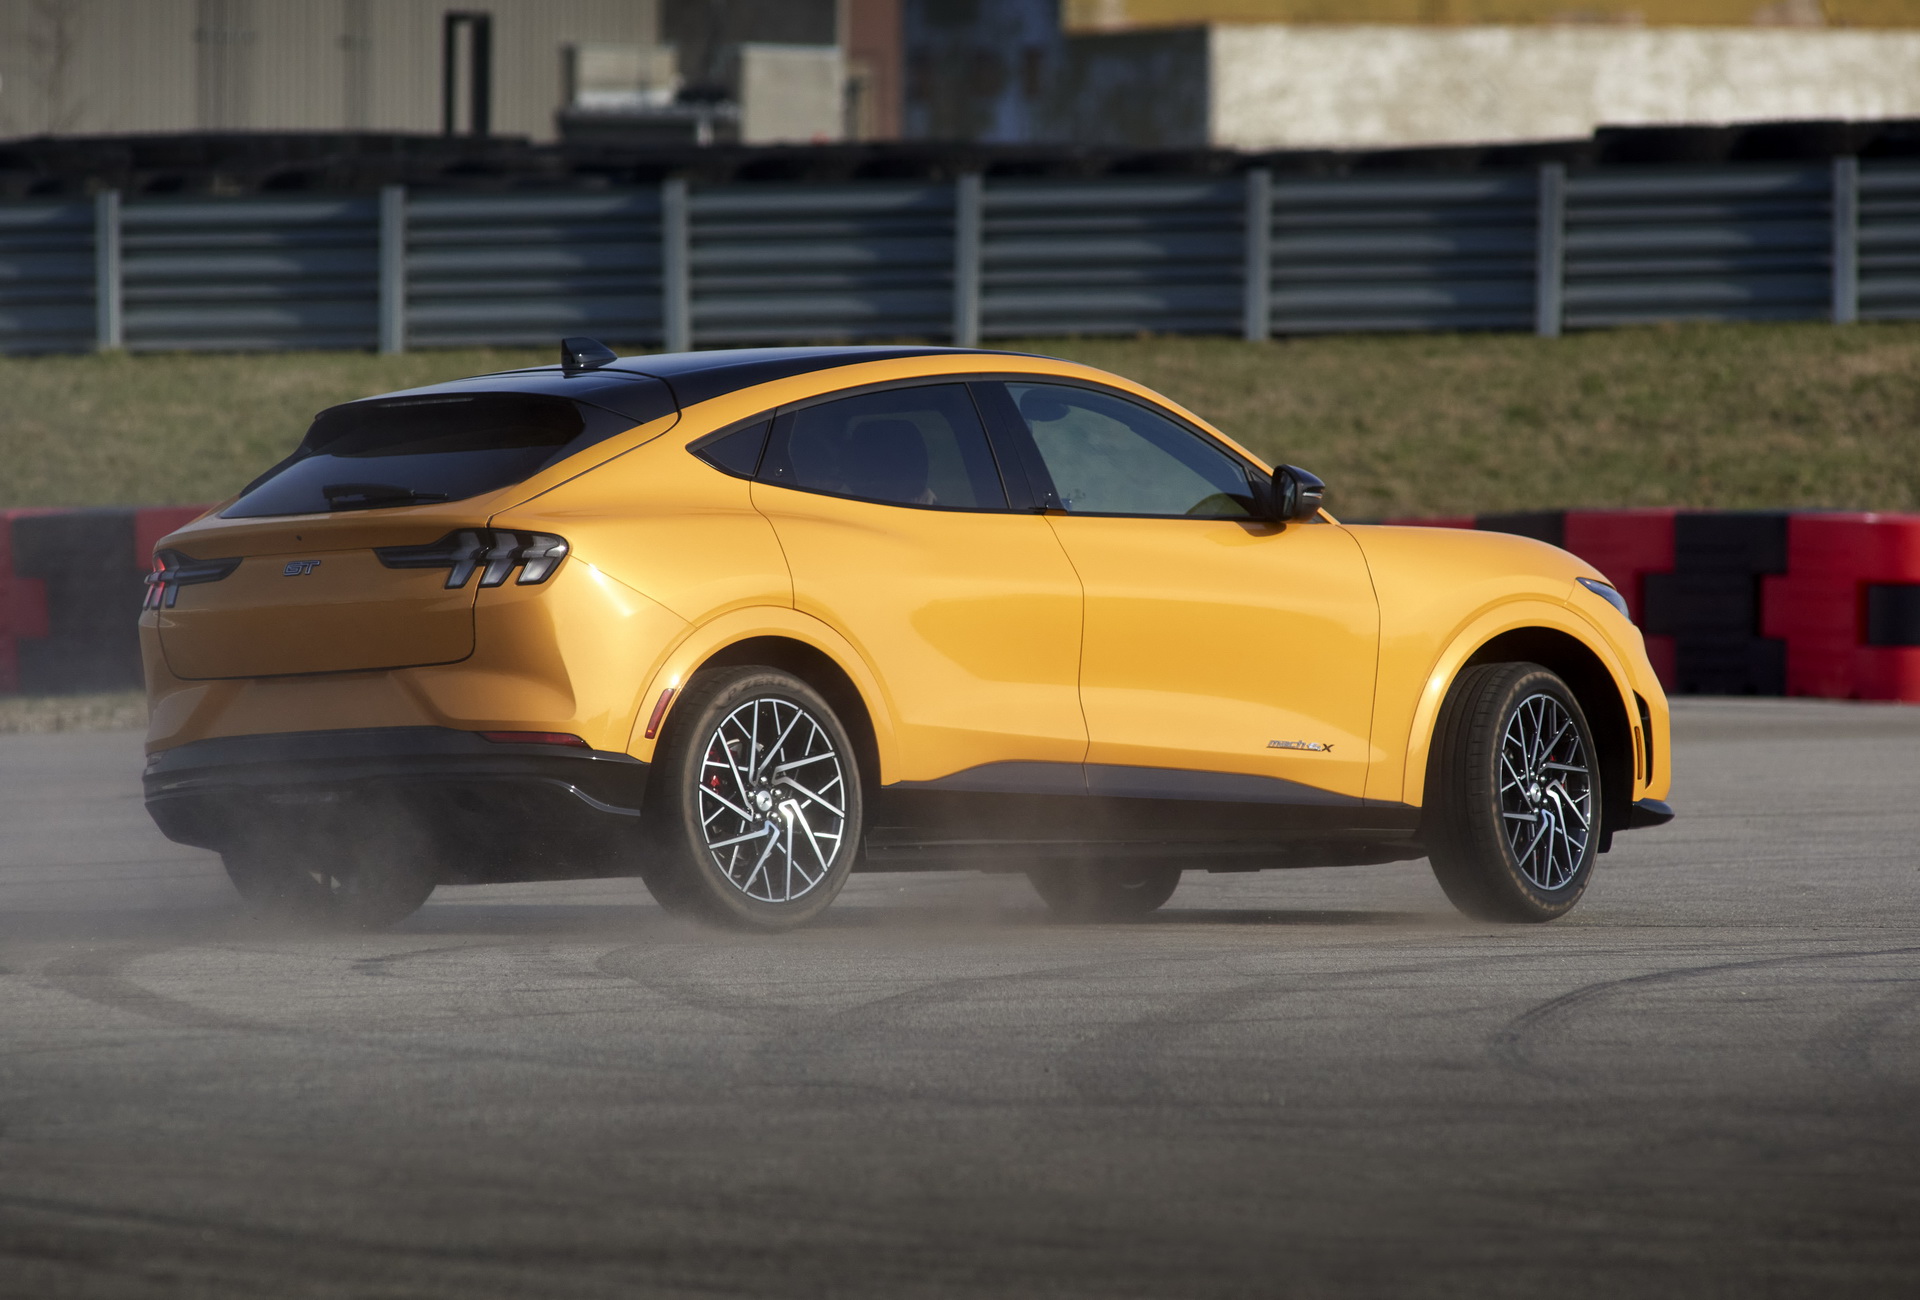 The Fastest Ford Mach-E Is The New GT With 480-HP That Starts At